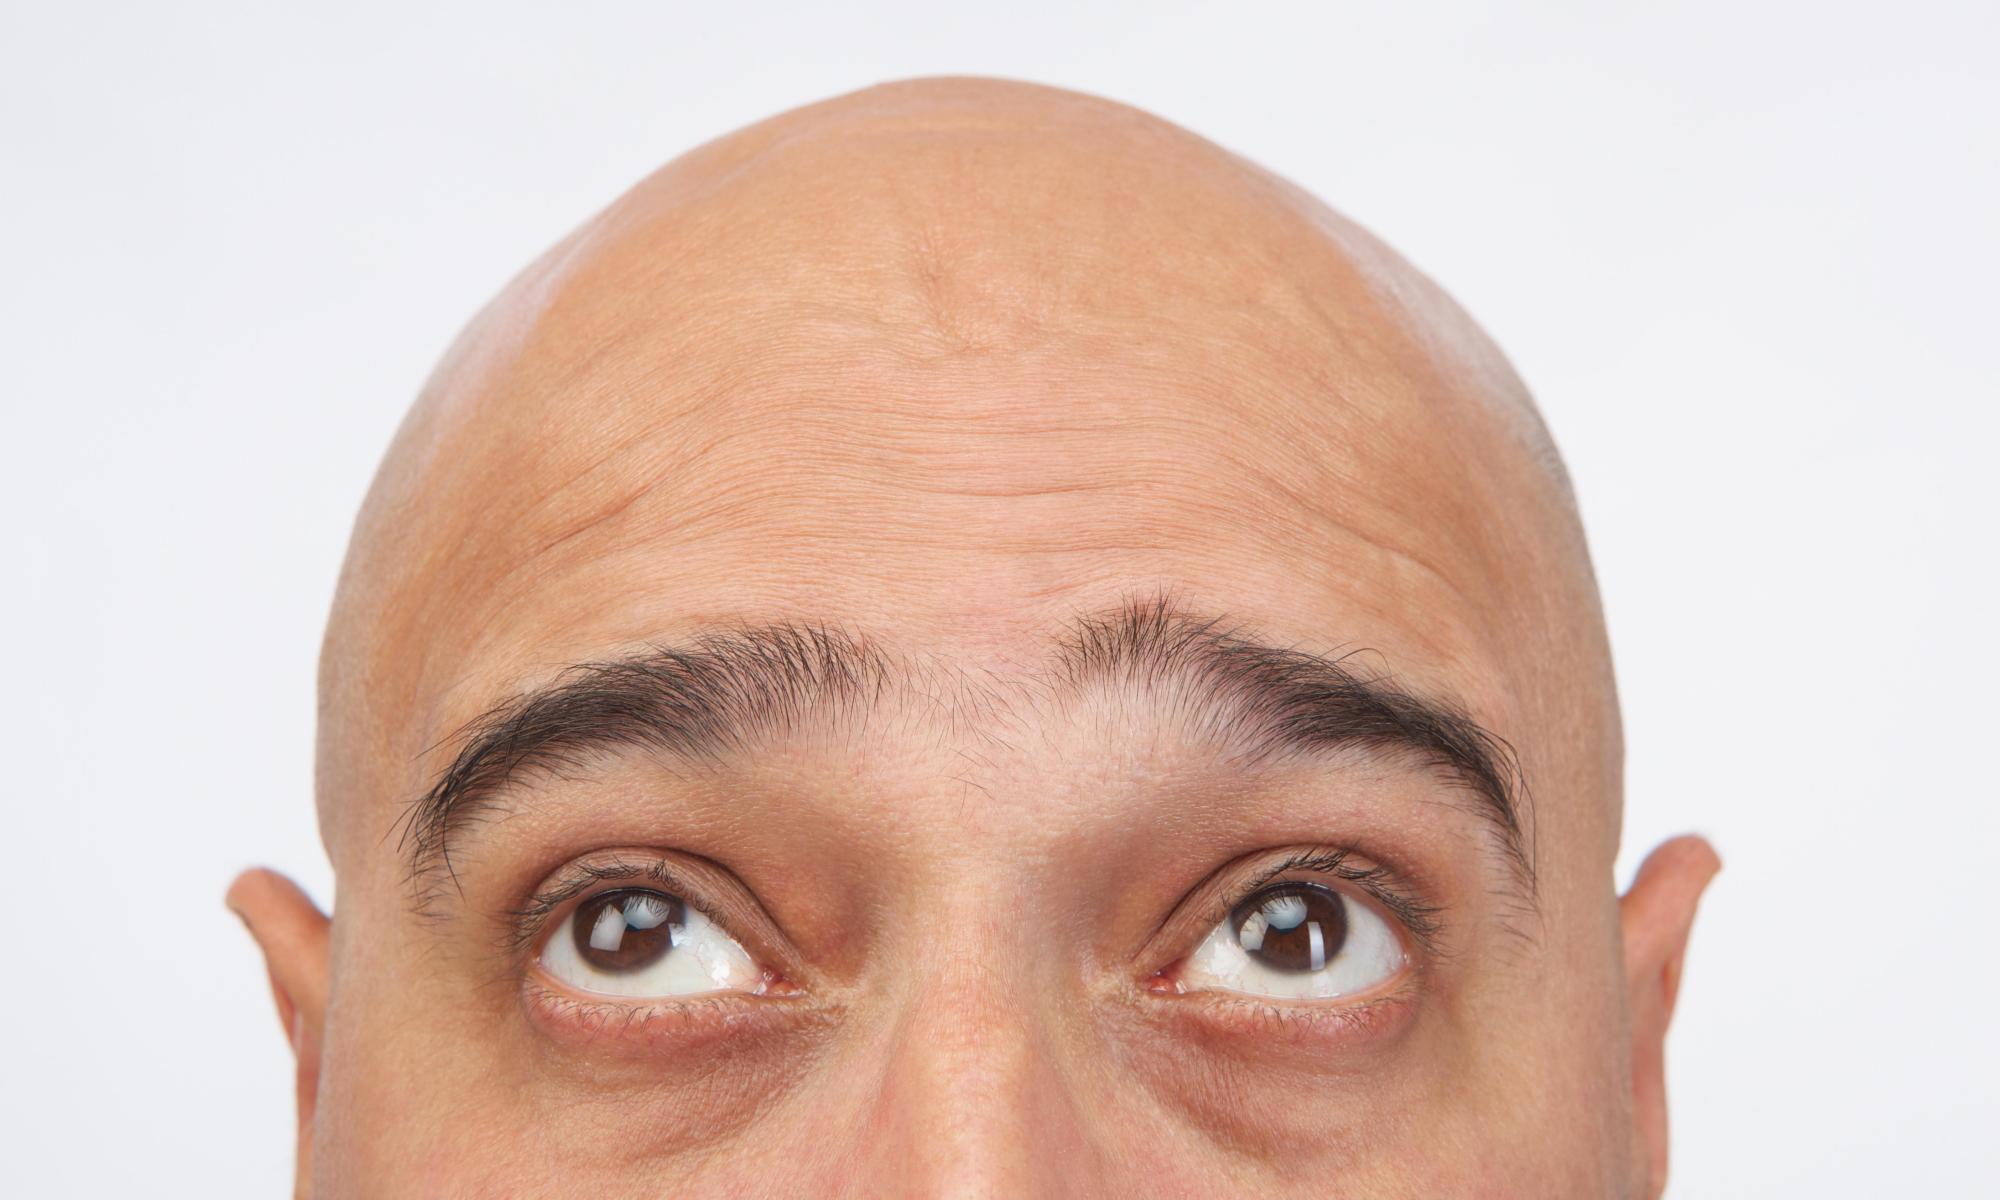 hair yesterday, gone today: why we are happily bald